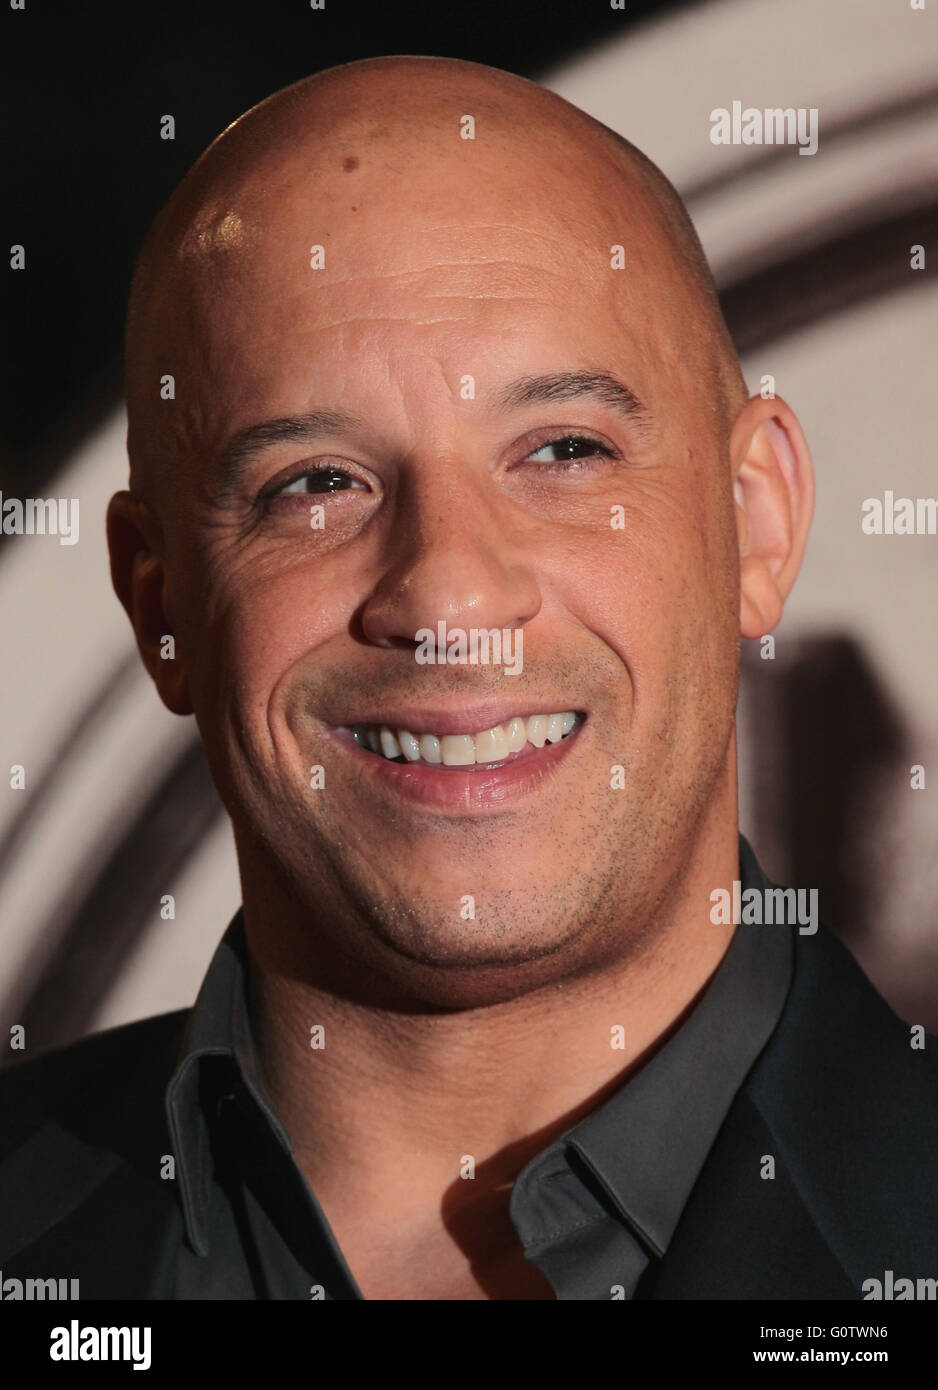 London, UK, 19th Oct 2015: Vin Diesel attends The Last Witch Hunter film premiere in London Stock Photo